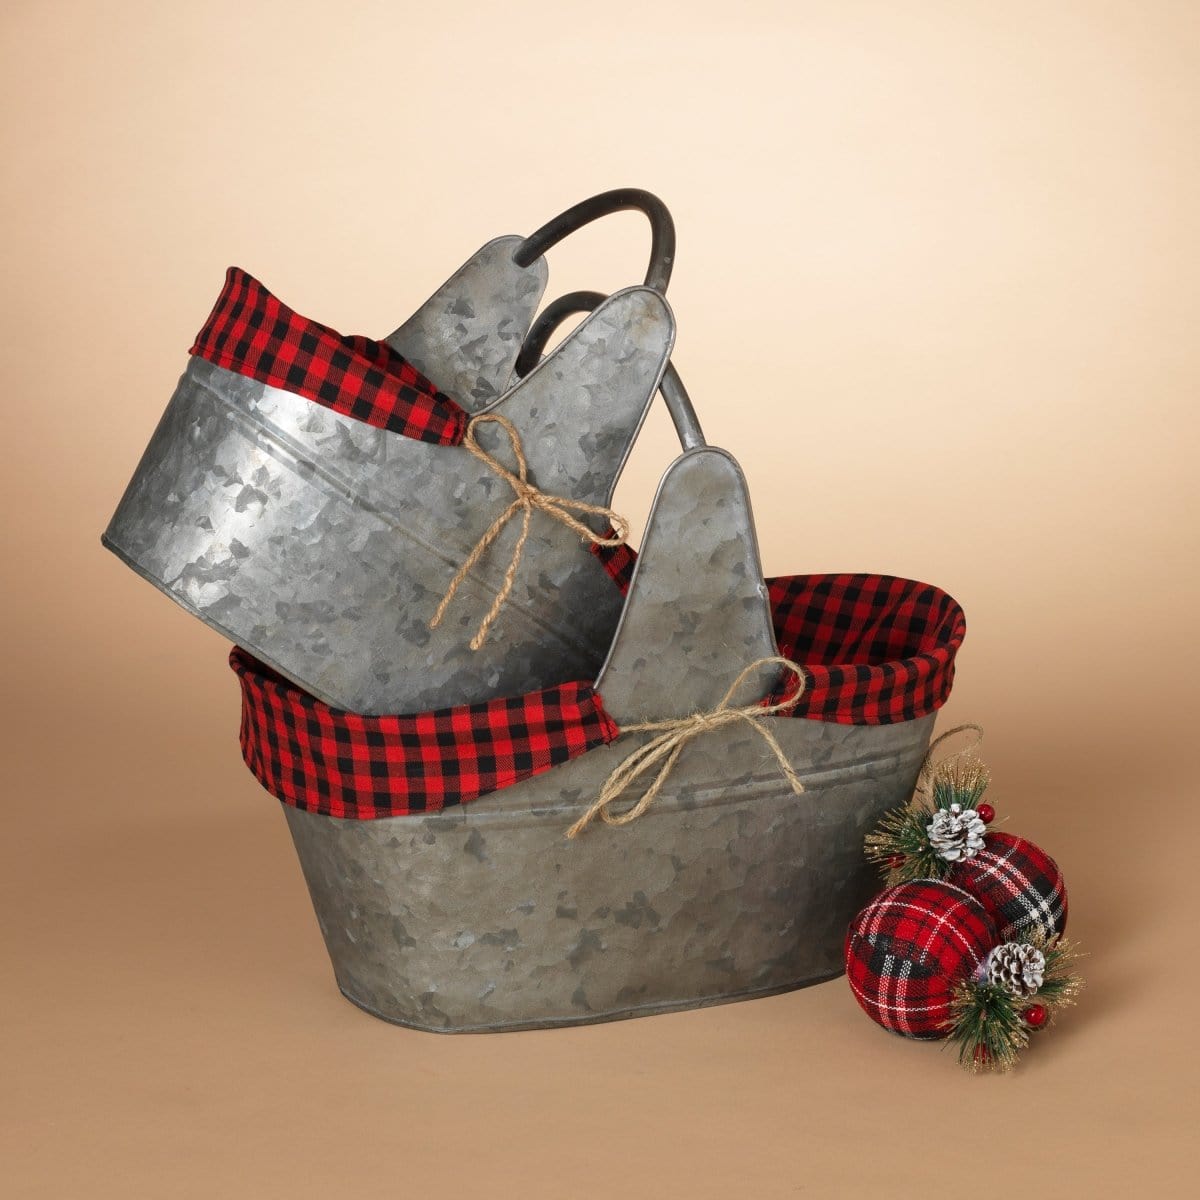 Galvanized Metal Black & Red Check Liner Basket With Handles Set of 2-Gerson-The Village Merchant